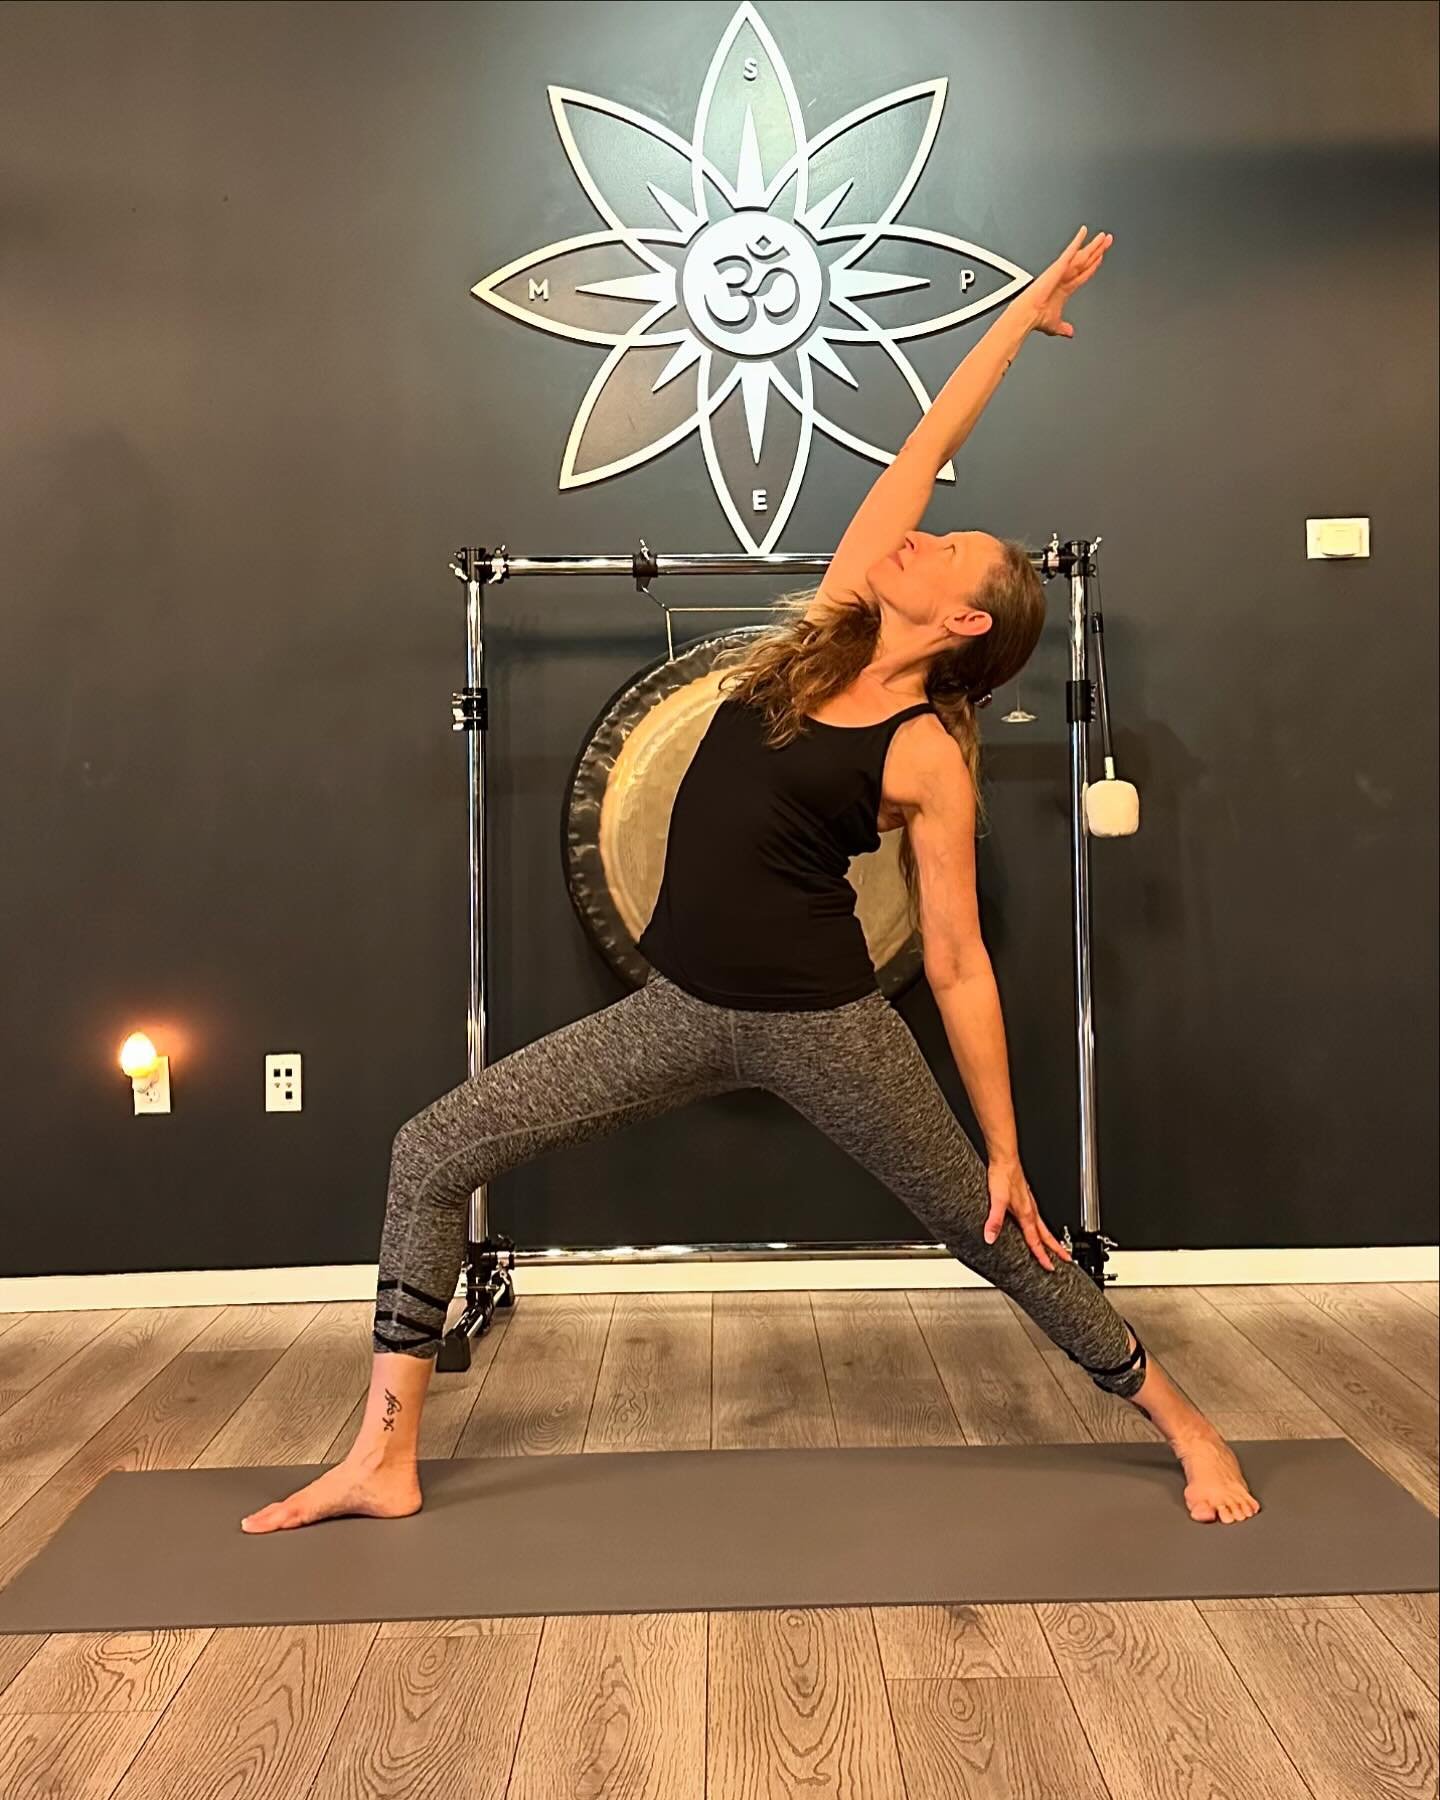 Curtains up, cushions down, and the love is all around! I'm settling in to my new Delray Beach digs and so excited to bring the joy and good vibes to @chakrachallenge in Boynton Beach! Come join me there for a Fusion Yoga practice at 1pm this Saturda